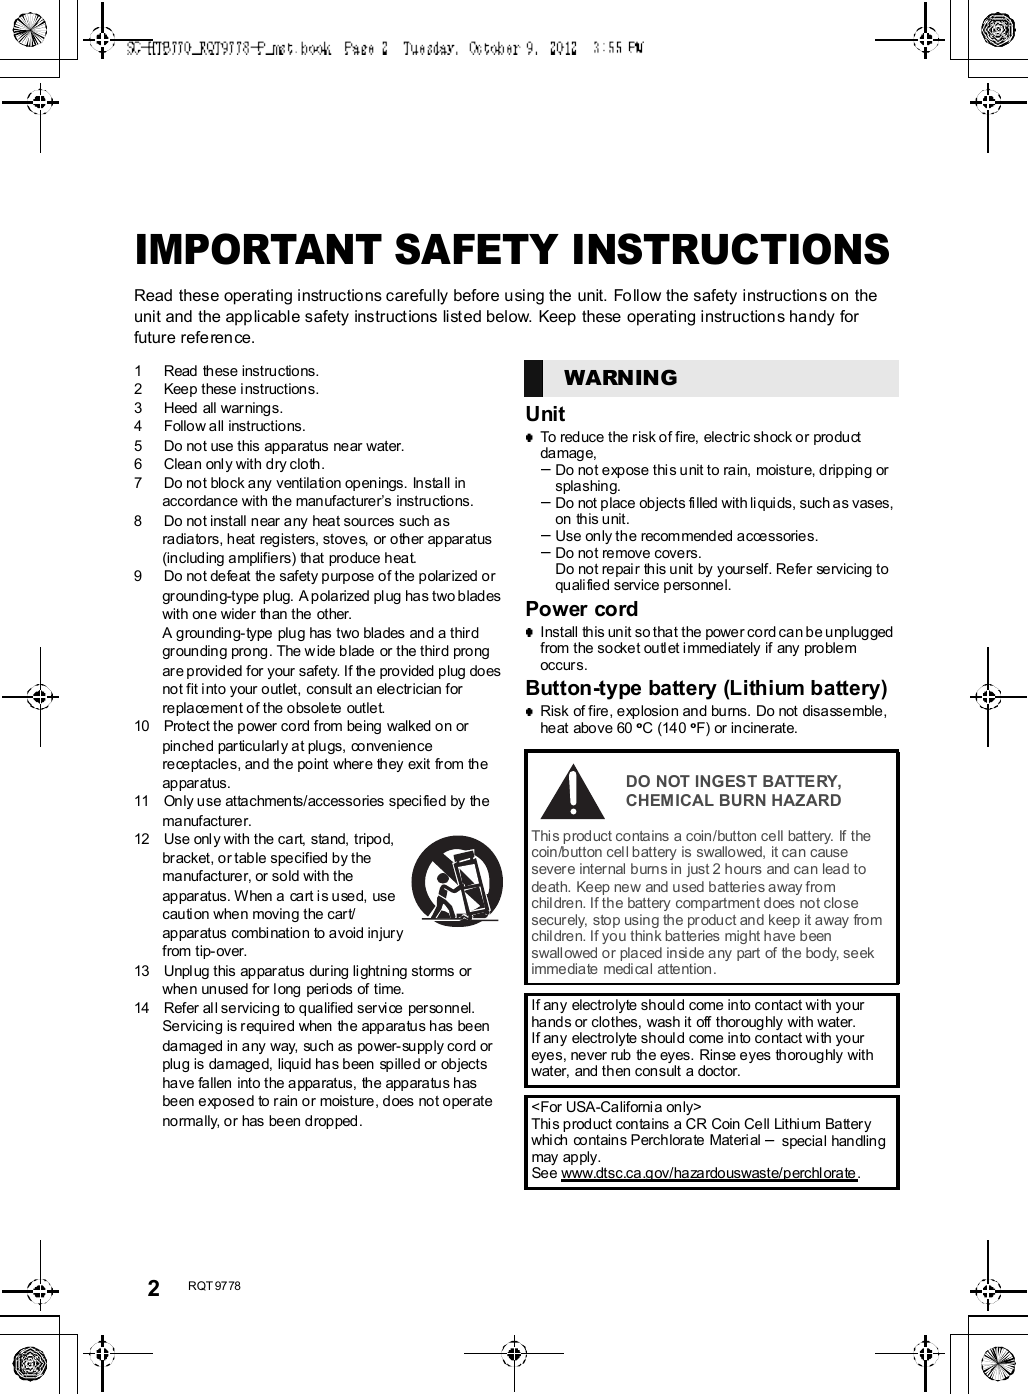 2R QT 97 78IMPORTANT SAFETY INSTRUCTIONSRead these operating instructions carefully before using the unit. Follow the safety instructions on theunit and the applicable safety instructions listed below. Keep these operating instructions handy forfuture reference.1 Read  these instructions.2 Keep these i nstructions.3 Heed  all warnings.4 Follow all instructions.5 Do not use this appa ratus near water.6 Clean onl y with dry cloth.7 Do no t block any ventilati on open ings. Install inaccordan ce with the man ufacturers instructions.8 Do not install near any hea t sou rces such asra diators, heat registers, stoves, or o ther appar atus(including amplifiers) that produce heat.9 Do not de feat  the safety purp ose of the polar ized orgr oun ding-type plug.  A polarized pl ug ha s two blad eswith on e wider th an the other.A grounding- type plug has two bla des and a thirdgr oun ding prong. The w ide blade or the third prongar e provided for your safety. If the pro vided plug doesnot fit i nto your outlet,  consult an electrician forreplacement of the obsolete outlet.10 Protect the power cord from be ing  walked on orpin ched par ticularl y at plu gs, conveniencere ceptacles, and the point wher e th ey exit from theap par atus.11 Only use attachments/accessories specified by thema nufacturer.12 Use only with the cart, stand, tripod,br acket, or table specified by thema nufacturer, or sold with theappar atus. W hen a  ca rt i s u sed,  usecauti on when moving the car t/appar atus combi nation to avoid injuryfrom tip- over.13 Unpl ug this appar atus dur ing lightni ng storms orwhe n unused for long  peri ods of time.14 Refer al l servicing to qualified ser vi ce per sonnel.Servicin g is required when  the appara tus has be endamaged in any way, such as power-supply cord orplu g is damage d, liquid has been  spilled or objectshave fallen  into the a ppa ratus, the app aratus hasbeen exposed to r ain or moisture , does  not oper atenormally, or has been dropped.UnitTo reduce the risk of fire, electric shock or productdamage,Do no t expose thi s u nit to rain,  moistur e, dripping orspla shing.Do not place objects fi lled with li quids, such as vases,on this unit.Use only the recom mended accessories.Do not remove covers.Do not repair this unit by yourself. Refer servicing toquali fied service personnel.Power cordInstall this unit so that the power cord can be unp luggedfrom the socke t ou tl et i mmediately if any pro blemoccurs.Button-type battery (Lithium battery)Risk of fire, explosion and burns.  Do not  disassemble,heat above 60 oC (140 oF) or incinerate.WARNINGDO NOT INGEST BATTERY,CHEMICAL BURN HAZARDThis product contains a coin/button cell battery. If thecoin /button cel l battery is swallo wed, it can causesevere internal b urns in  just 2 hours  and can lead todeath. Keep new and used batteries away fromchil dren. If the battery  comp artment d oes  no t closesecurely, stop usin g th e pr oduct and keep it away fromchil dren. If you thin k ba tteries mig ht have b eenswall owed or placed inside a ny part  of  the body, se ekimmediate medical attention.If any electro lyte shoul d come into contact wi th yourhand s or clothes, wash it off thor oug hly with water.If any electro lyte shoul d come into contact wi th youreyes, never rub  the eyes. Rinse e yes thoroug hly withwater,  and then con sult a doctor.&lt;For USA-California only&gt;This prod uct contains a CR Coin Cell Lithi um Batter ywhi ch  contains Perchlorate  Materi al  special handlingmay apply.See www.dtsc.ca.gov/ha zardouswaste/perchl orate.